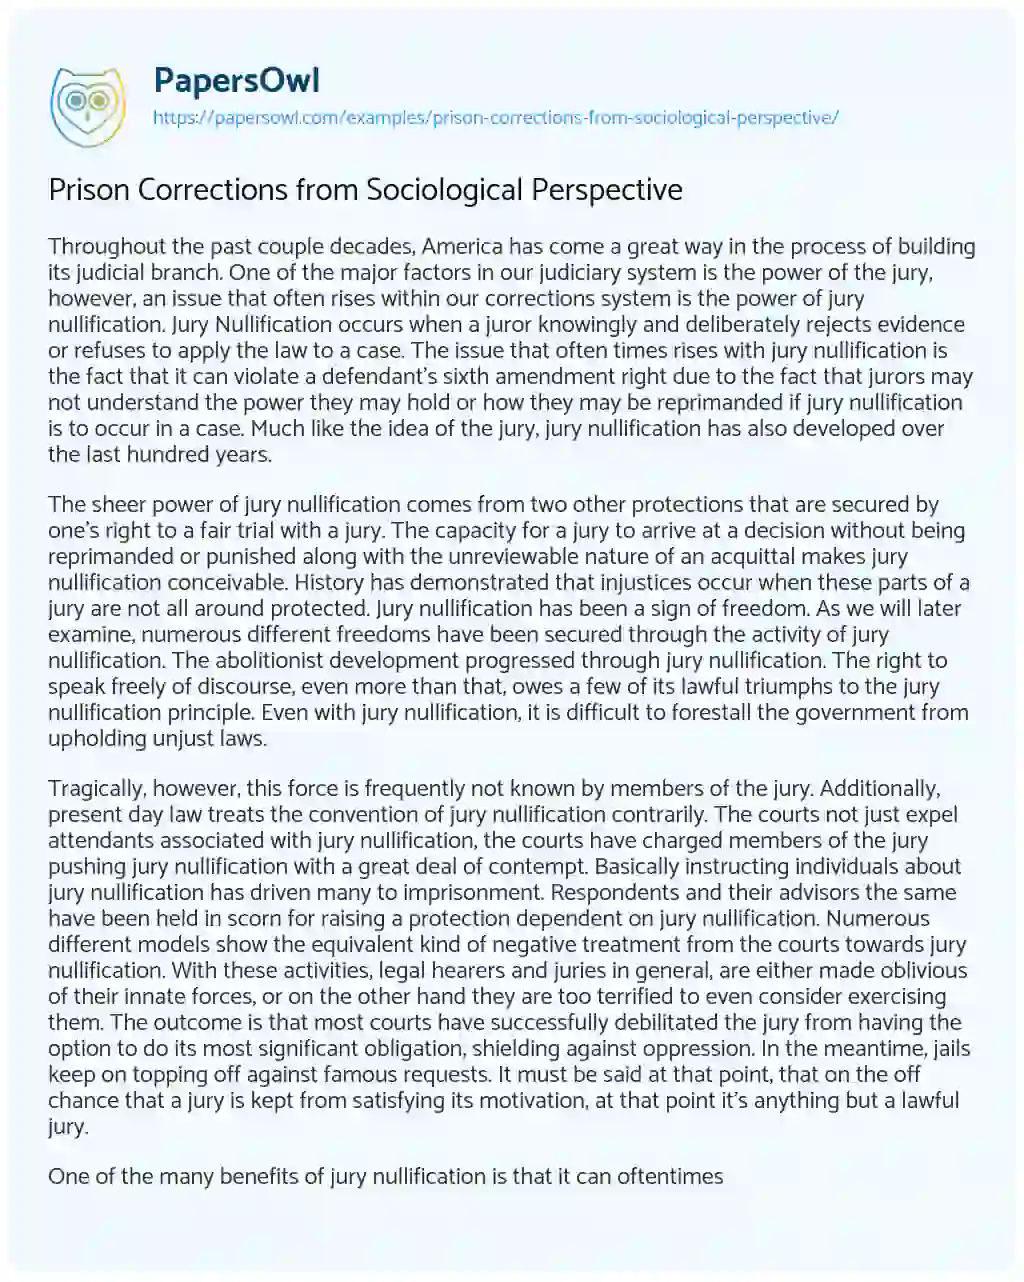 Prison Corrections from Sociological Perspective essay